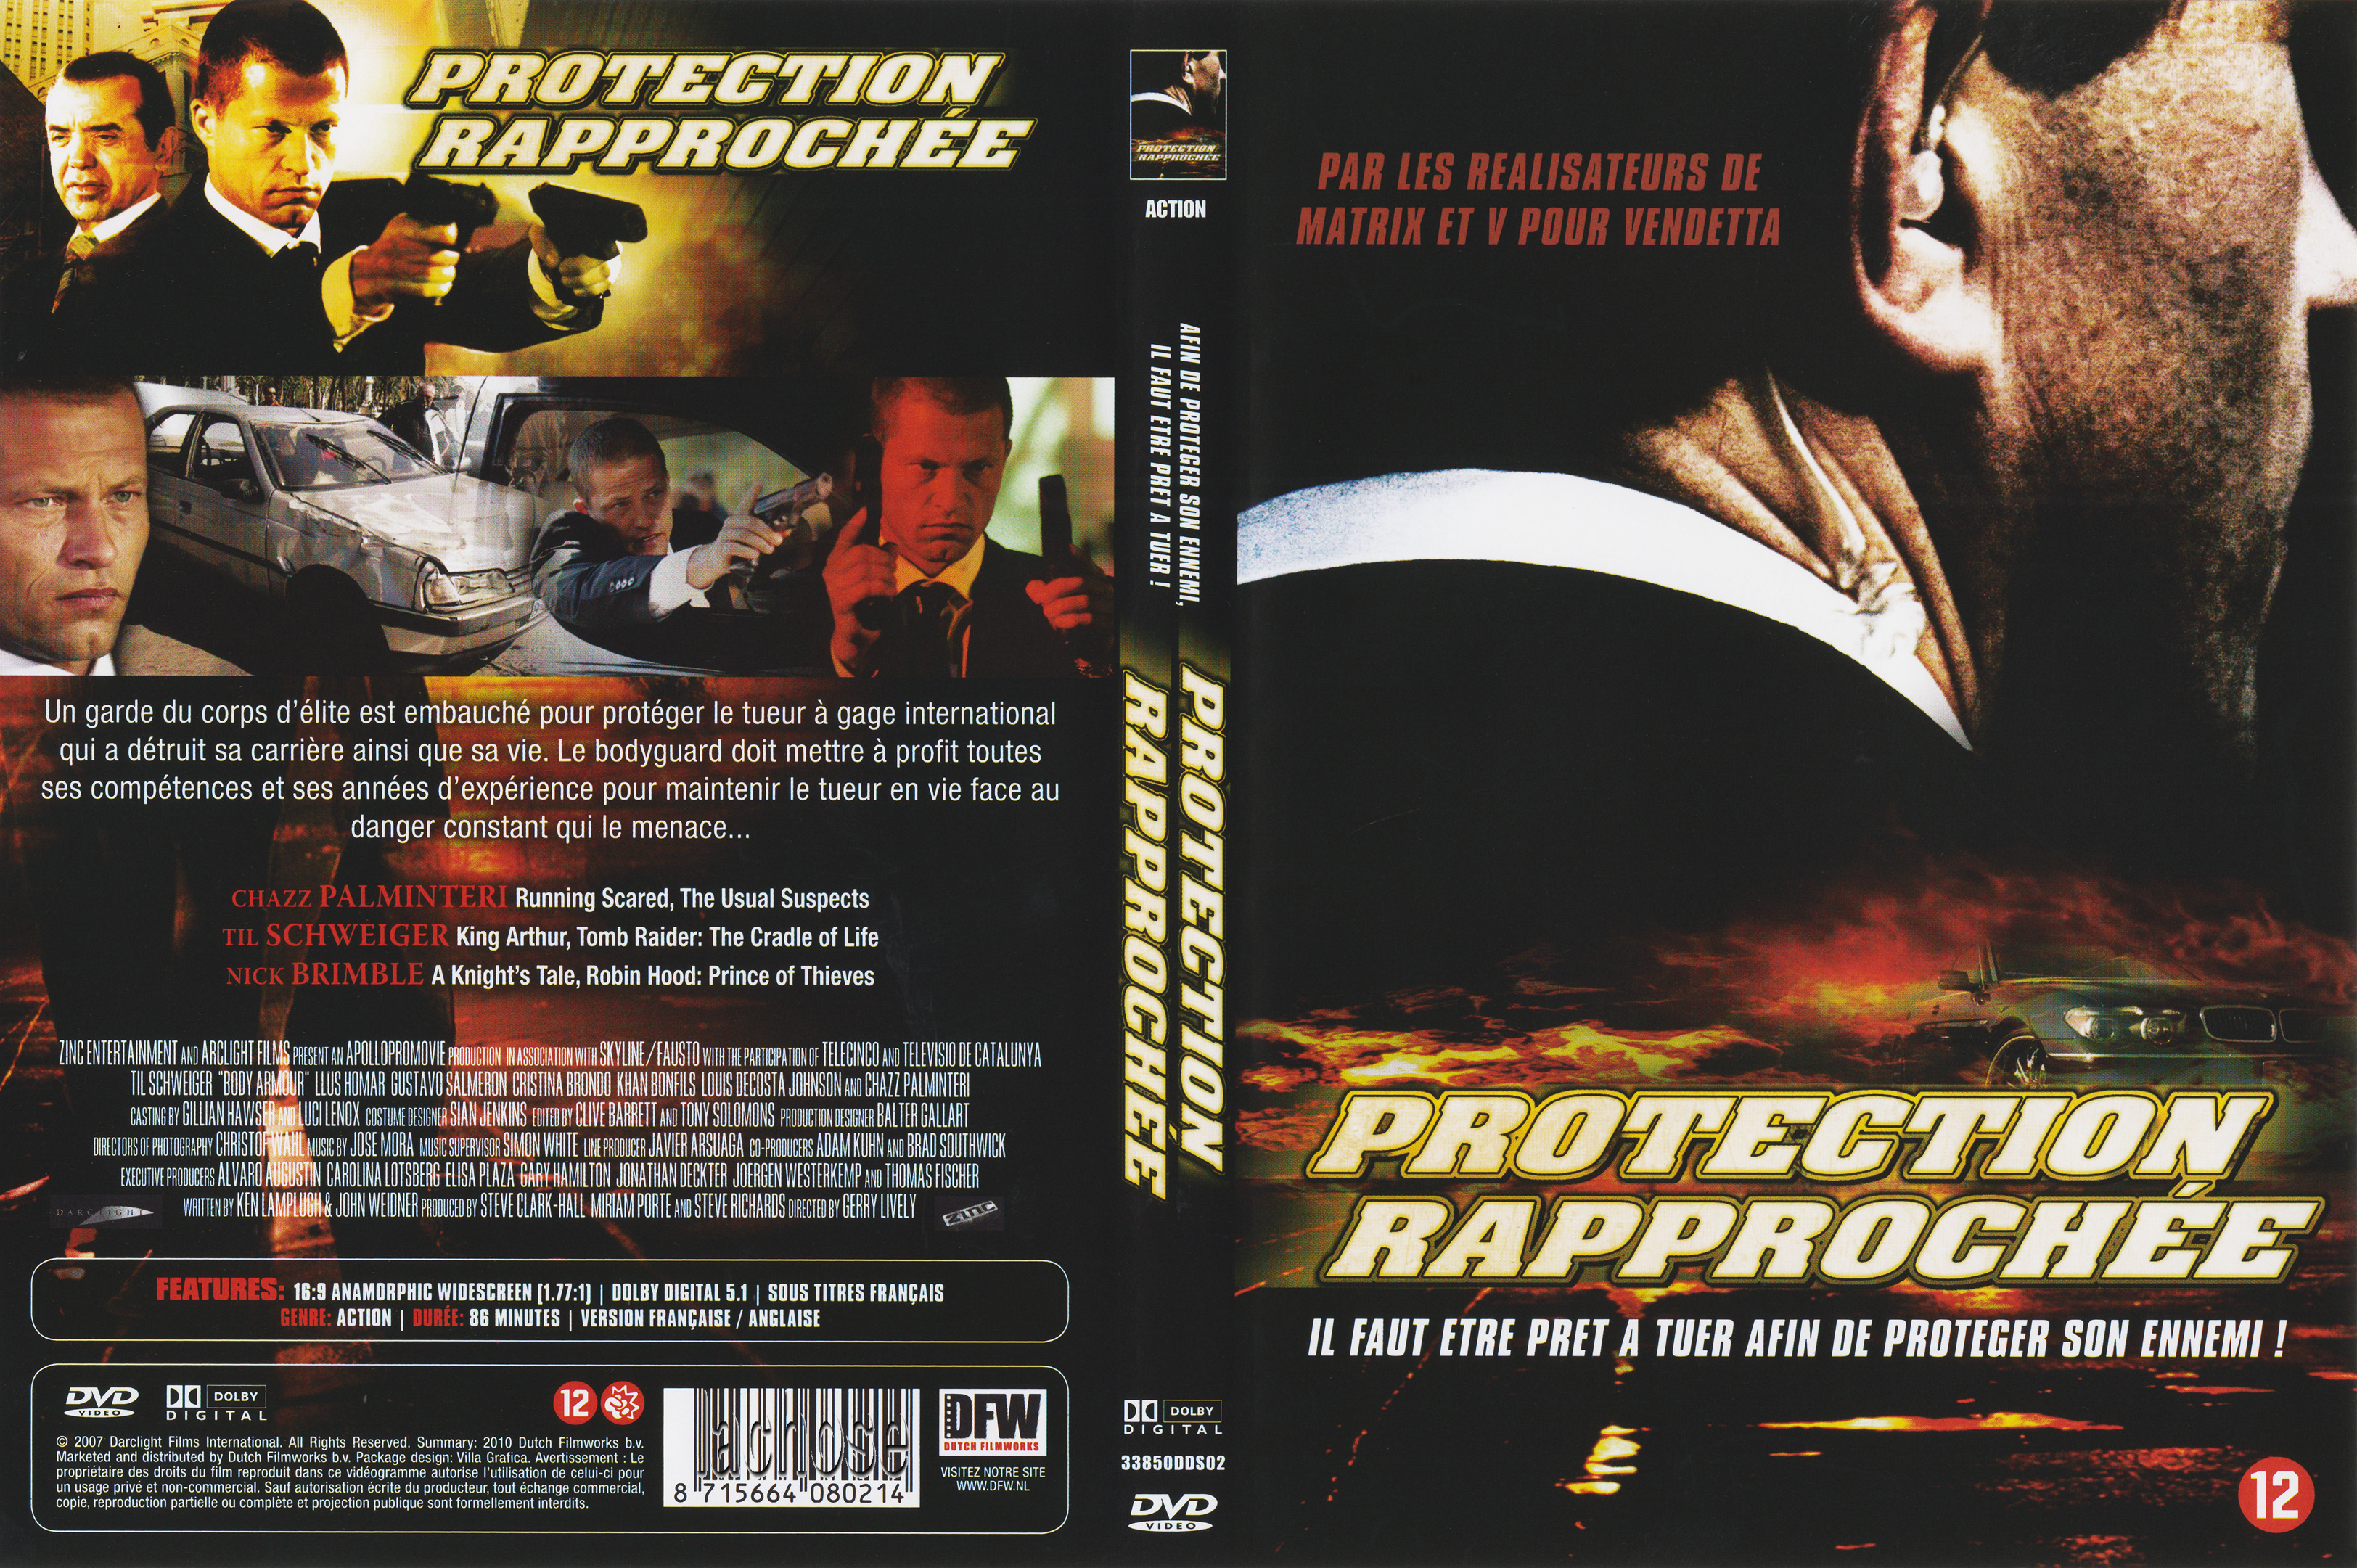 Jaquette DVD Protection rapproche (2007) v2